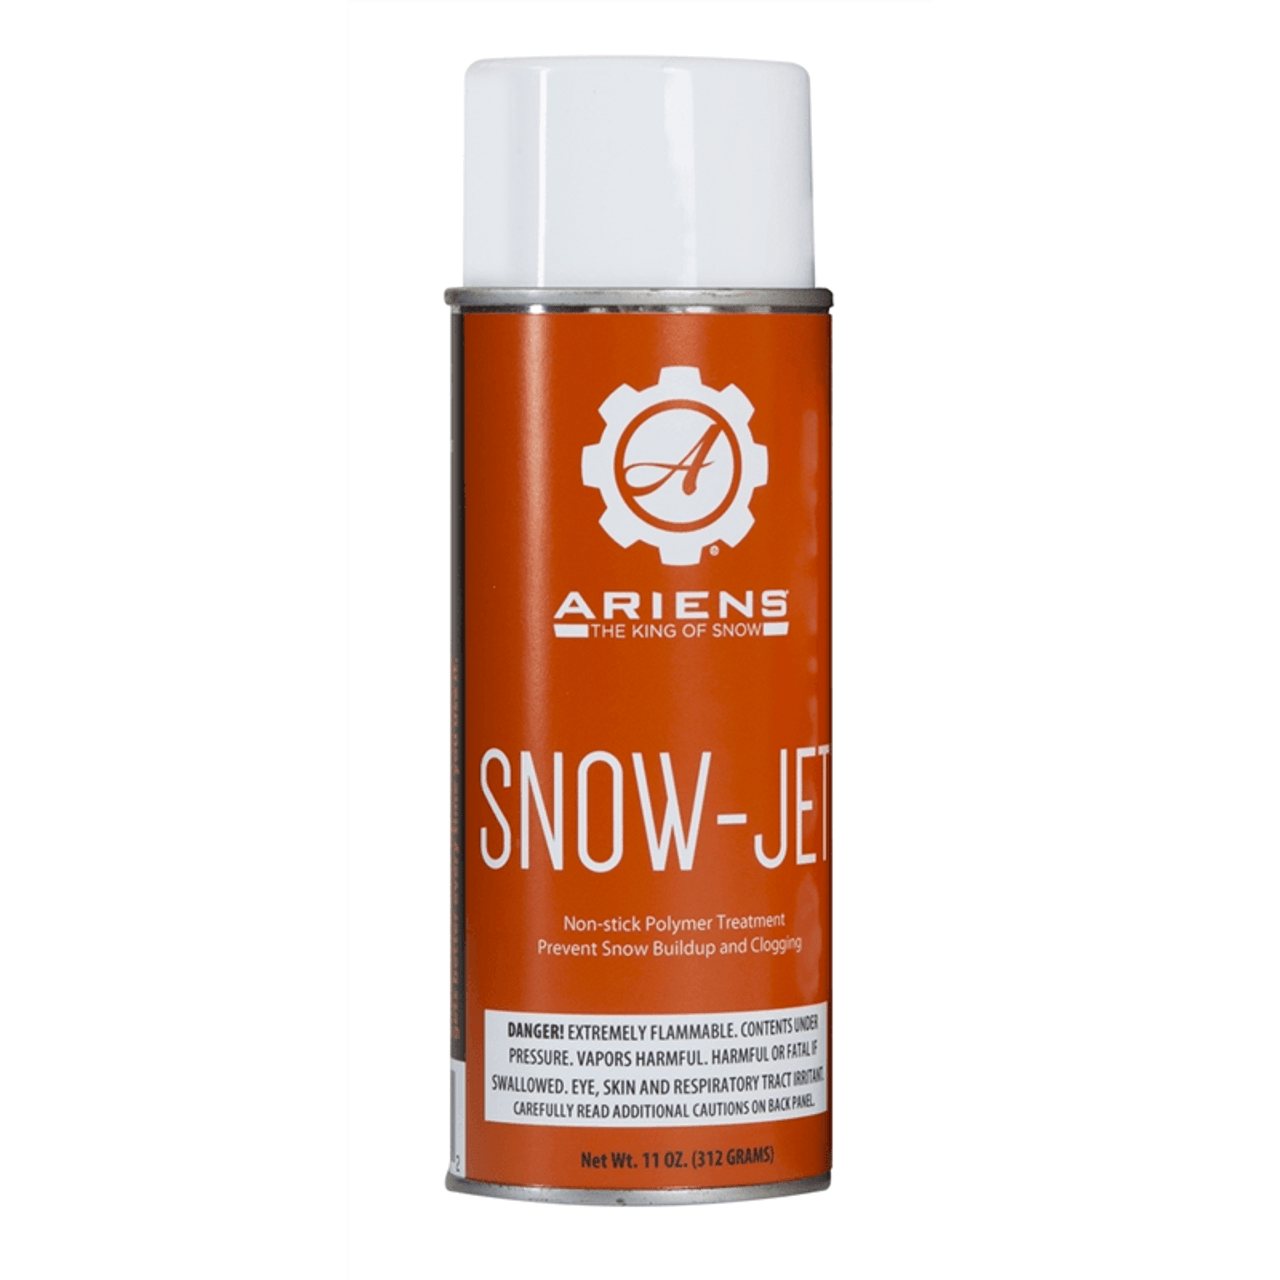 Maximize the performance of your Ariens snow blower in one easy step with Snow-Jet non-stick spray. A petroleum-based product, snow-jet is specifically formulated to prevent snow and ice from sticking to surfaces.